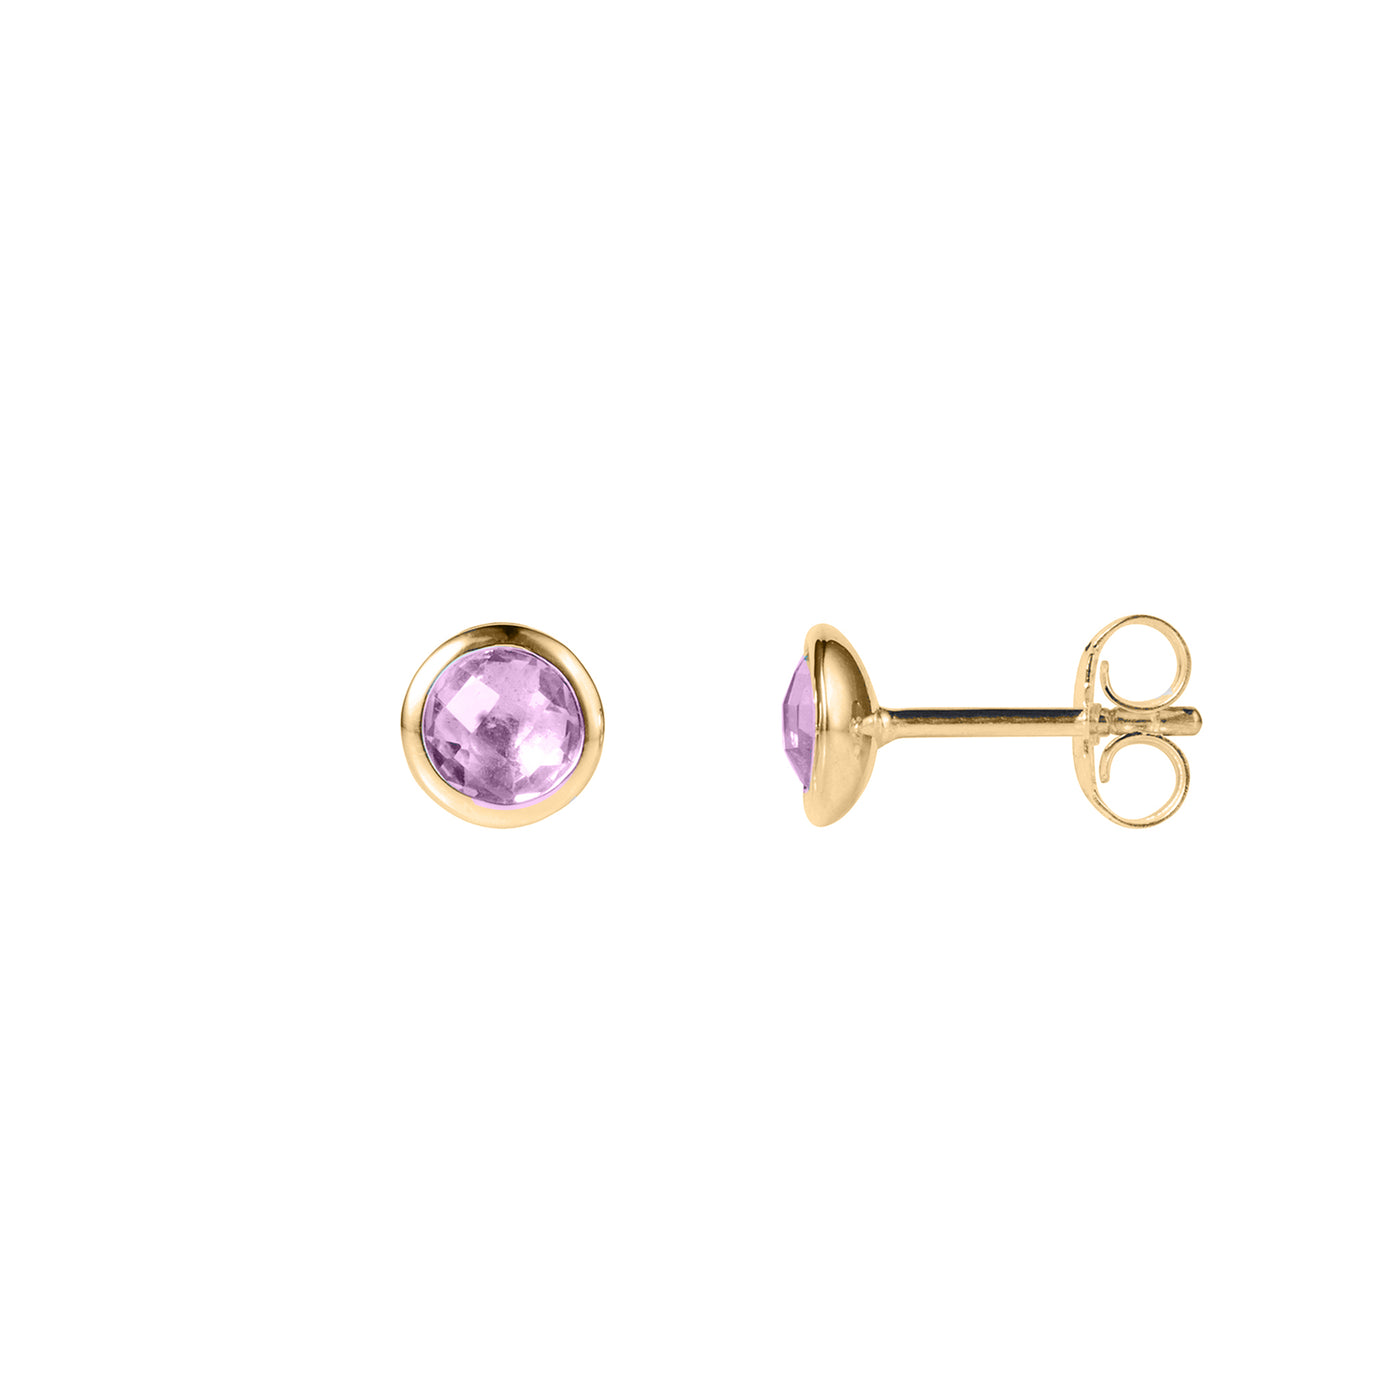 Image of Gold and Amethyst Stud Earrings